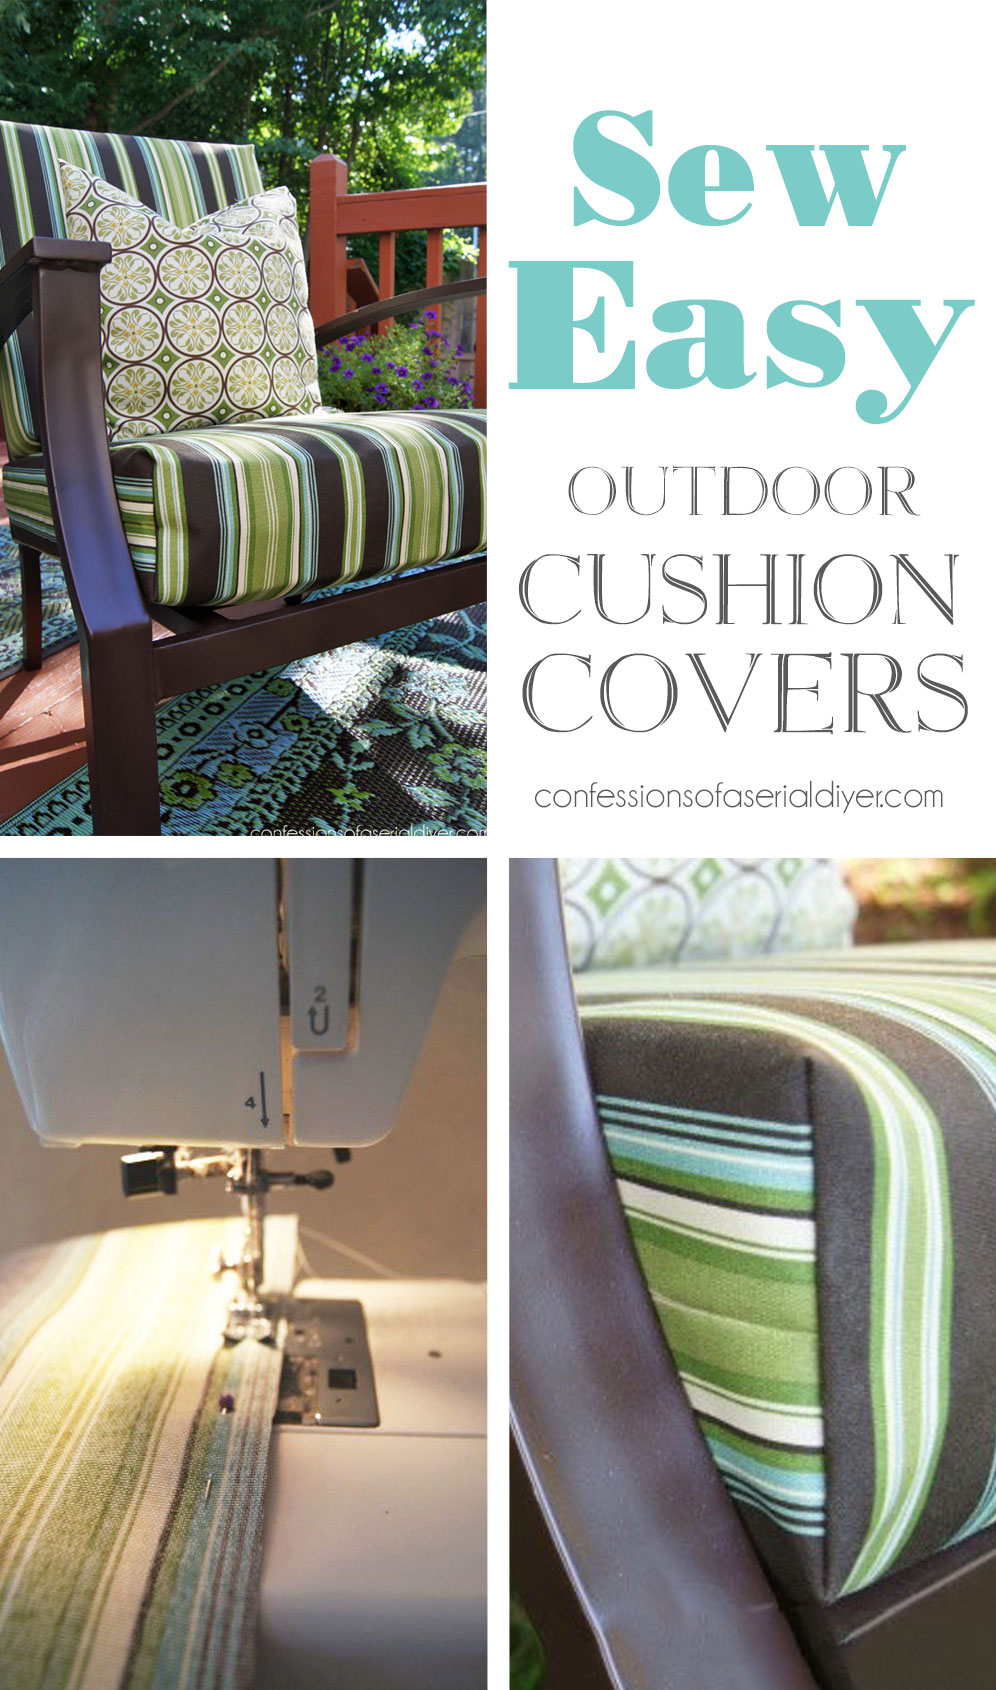 Sew Easy Outdoor Cushion Covers, How Do I Wash Outdoor Cushion Covers